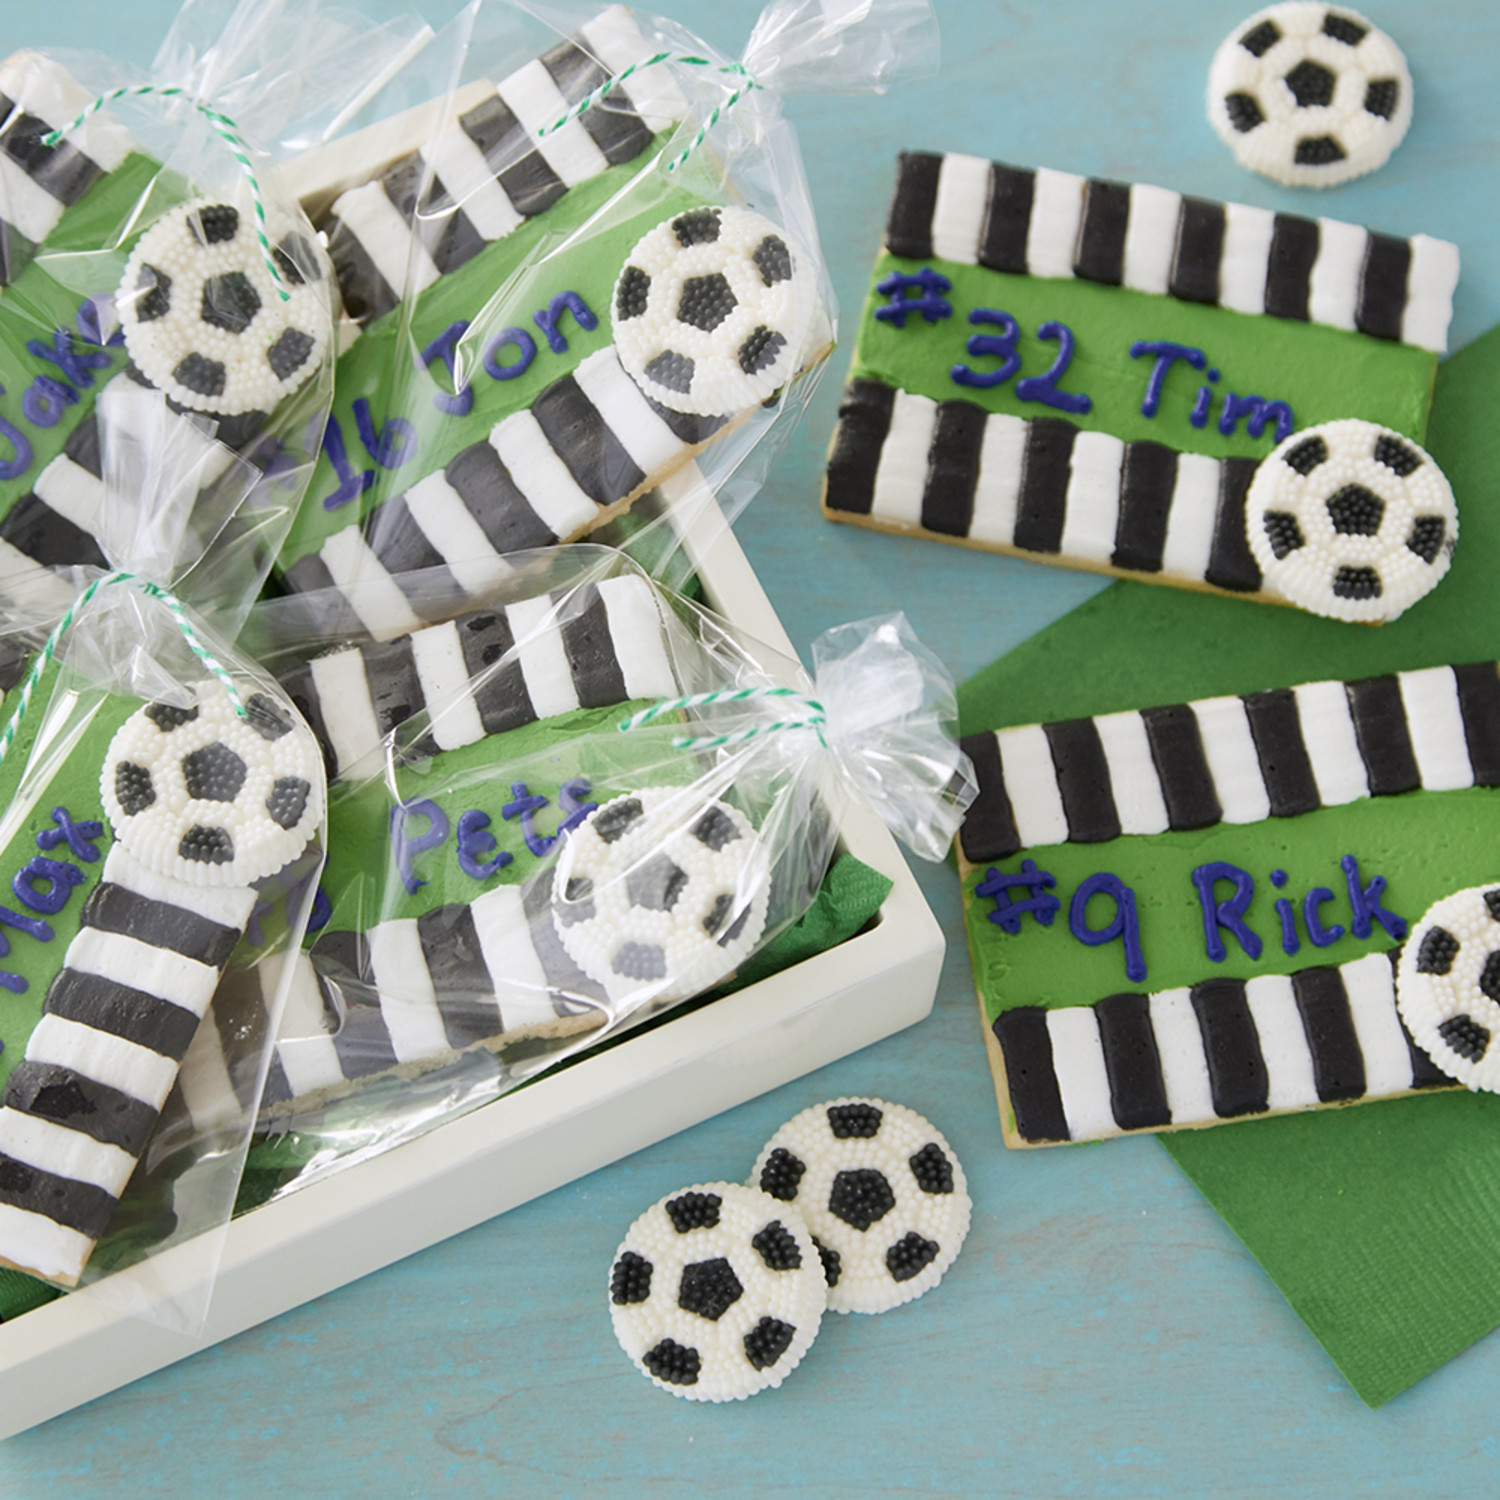 Get a Kick Out of Soccer Cookies